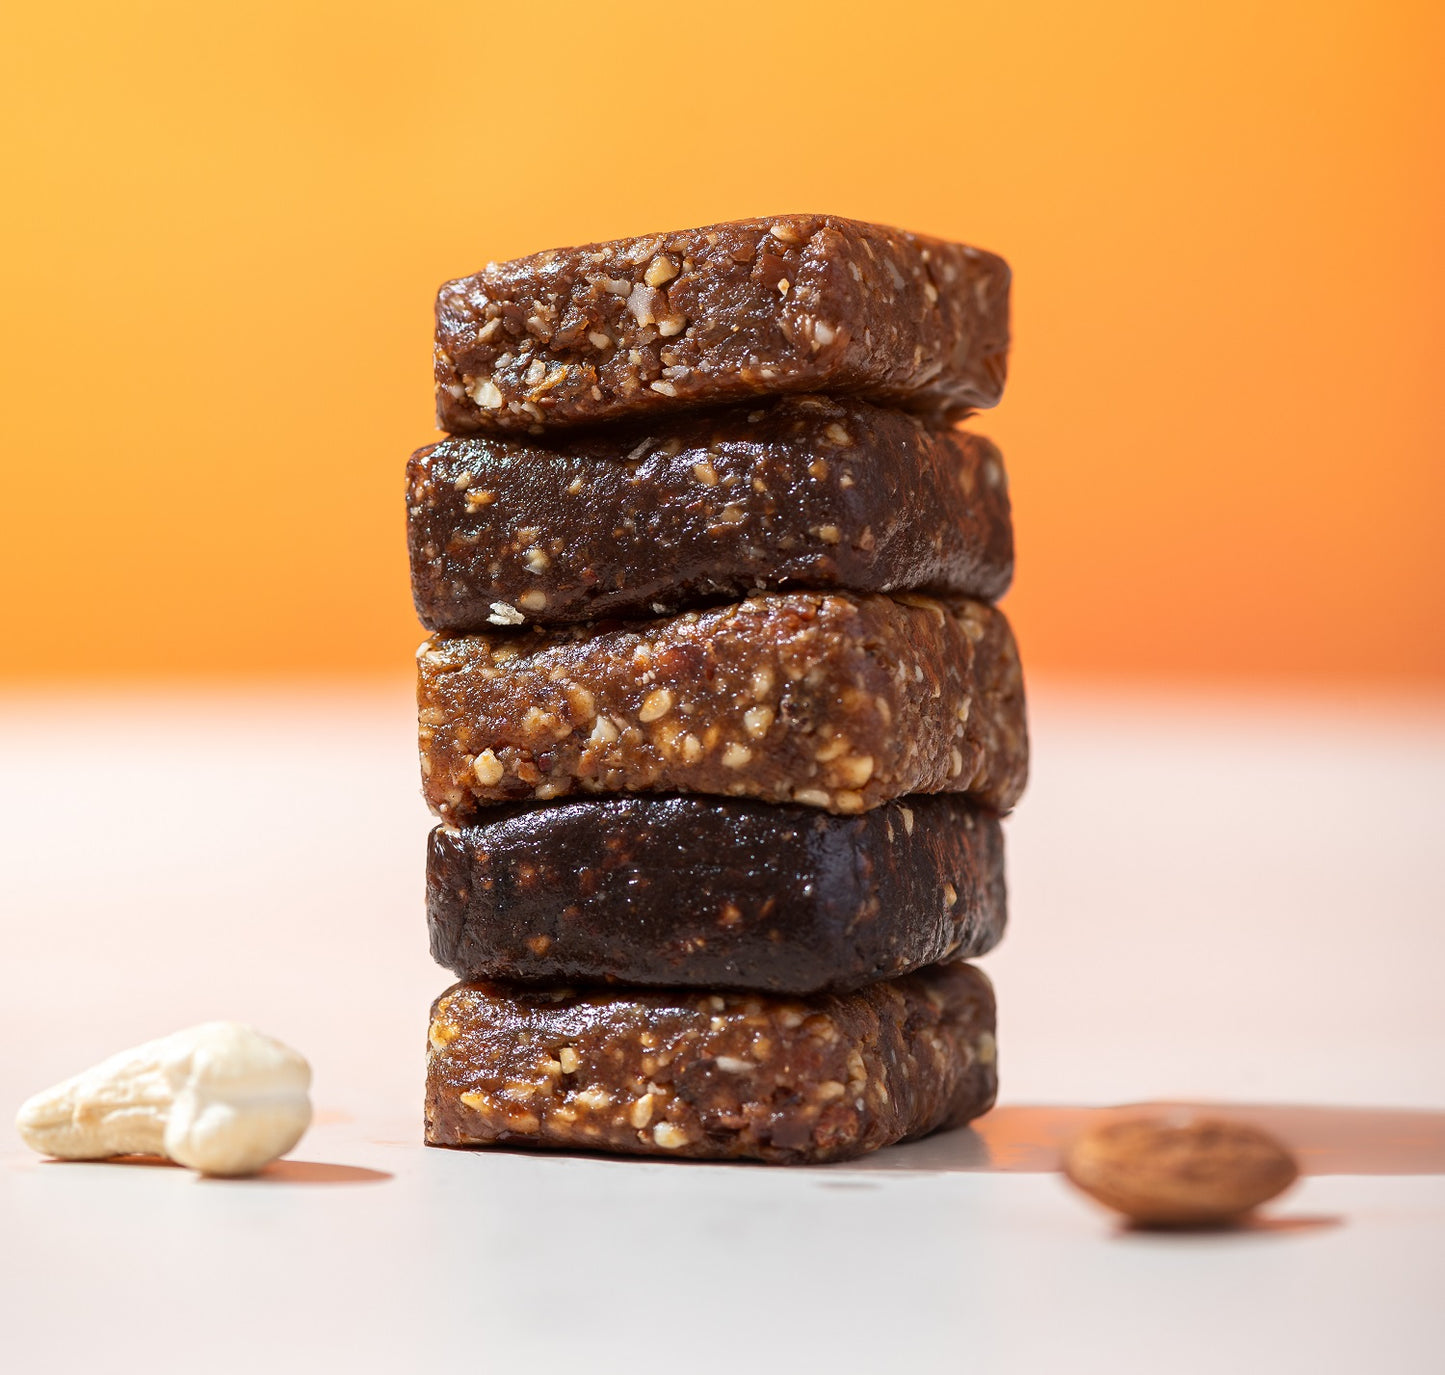 Date Nut Squares - Try Them All Pack : 8 Bars